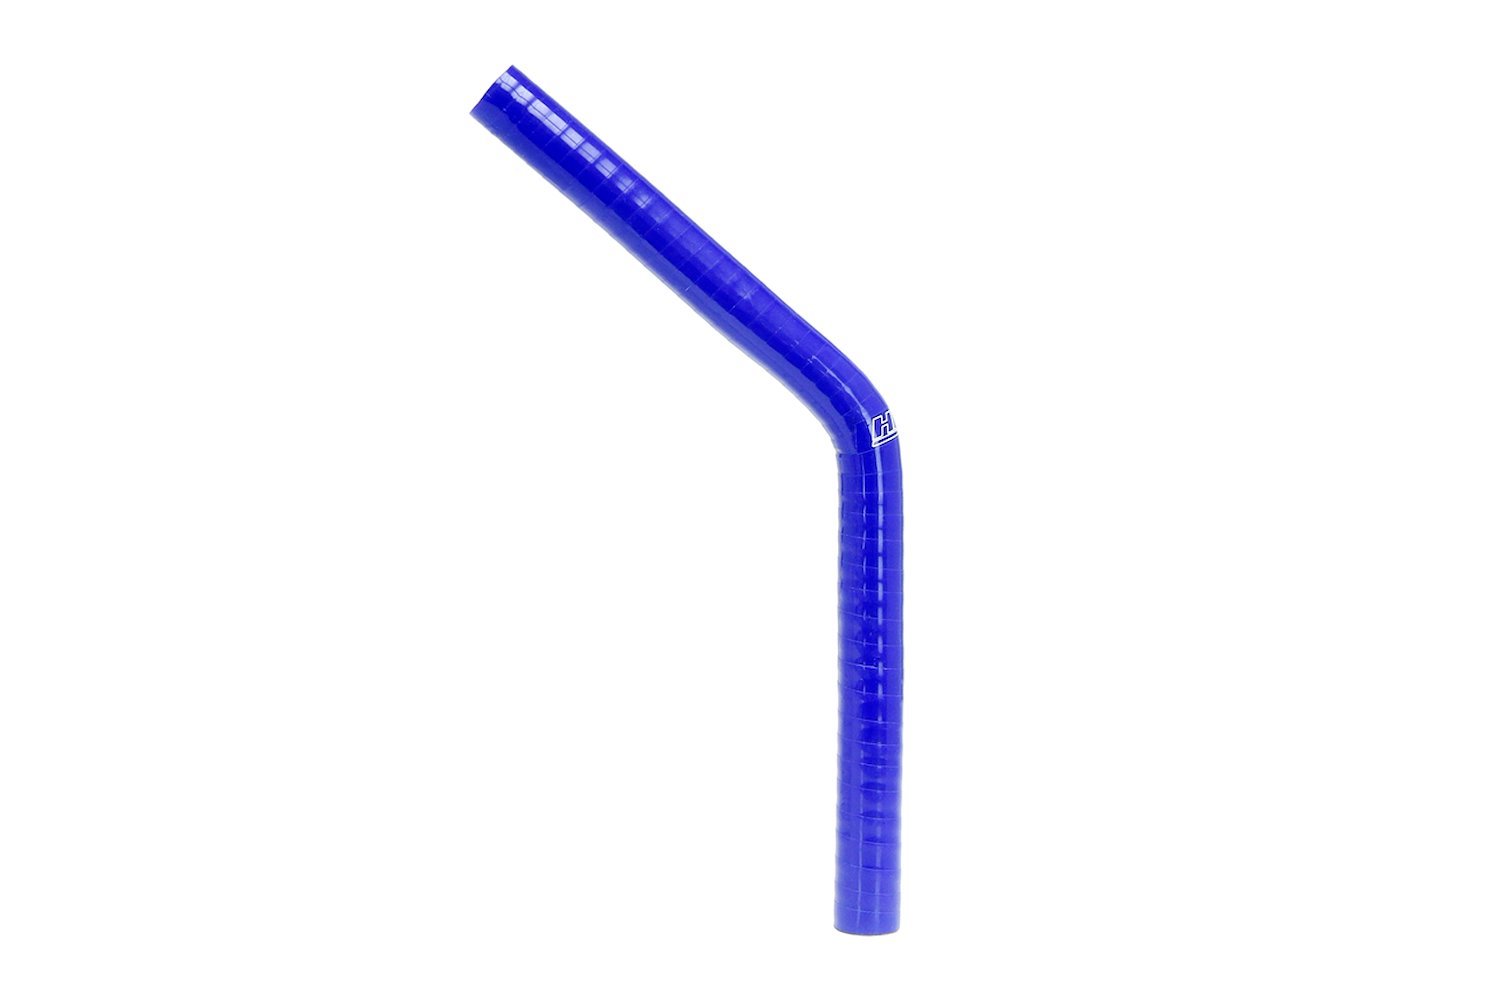 HTSEC45-175-L10-BLUE Silicone 45-Degree Elbow Hose, High-Temp 4-Ply Reinforced, 1-3/4 in. ID, 10 in. Leg, Blue